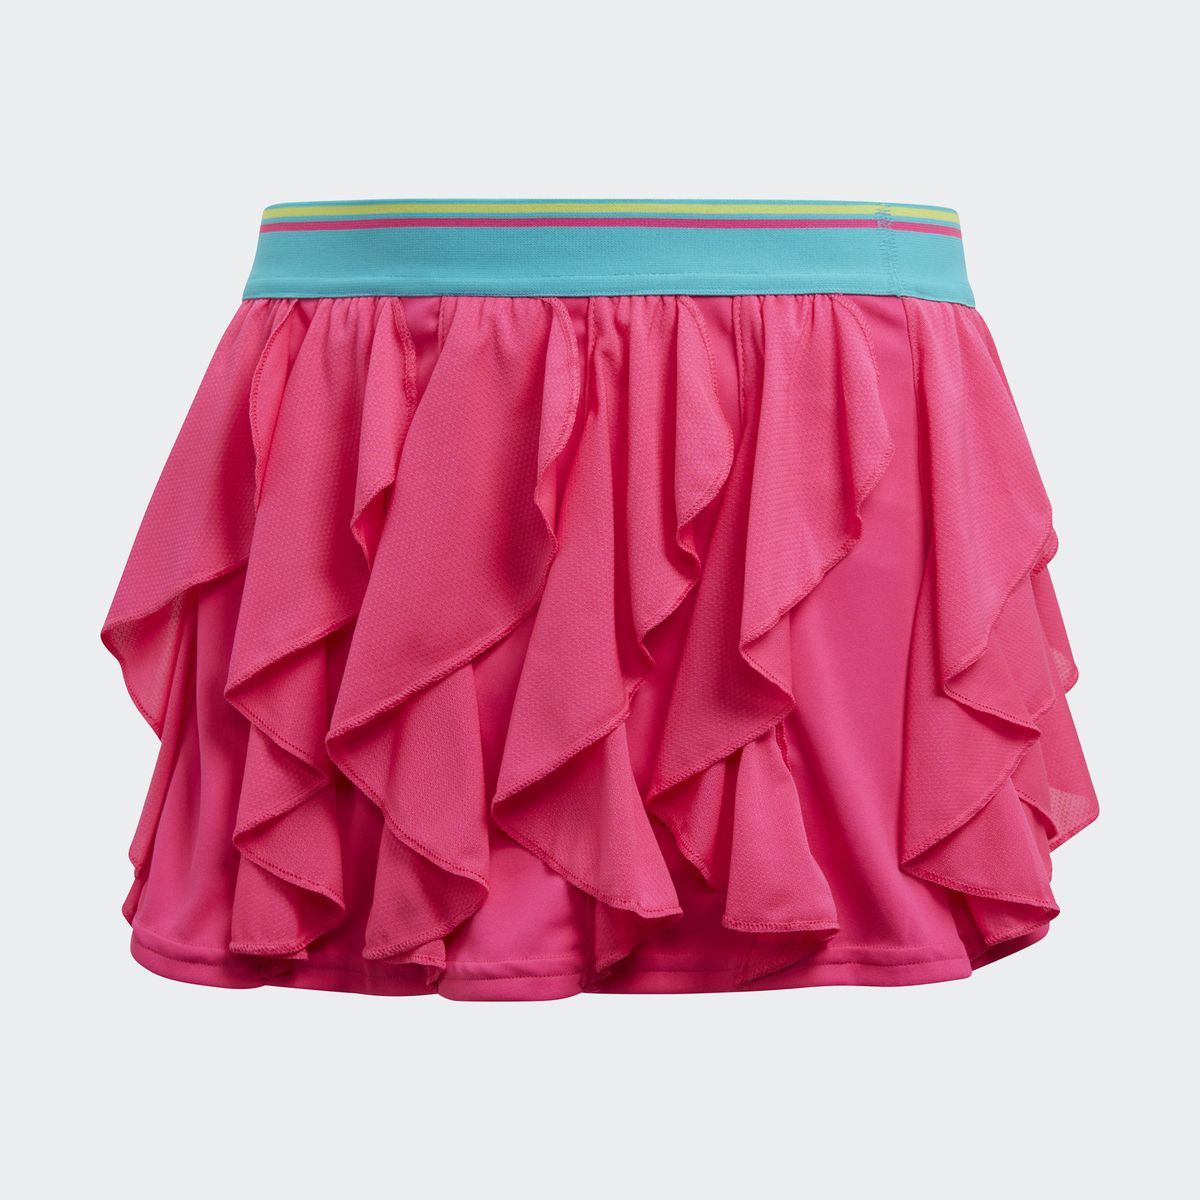    Adidas G Frilly Skirt, : . DH2806.  164